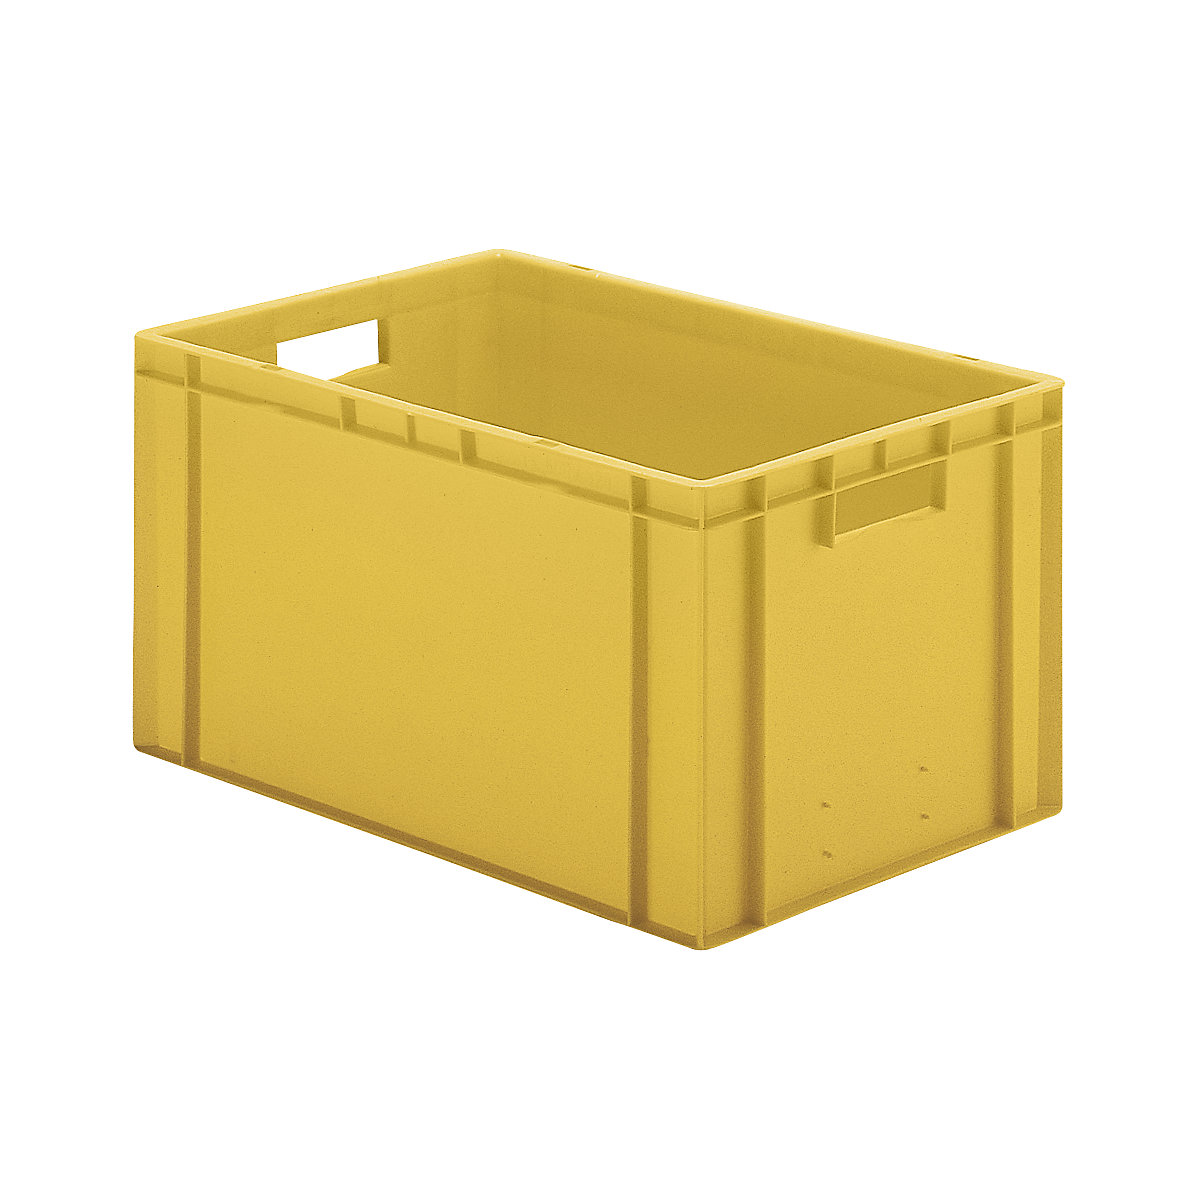 Euro stacking container, closed walls and base, LxWxH 600 x 400 x 320 mm, yellow, pack of 5